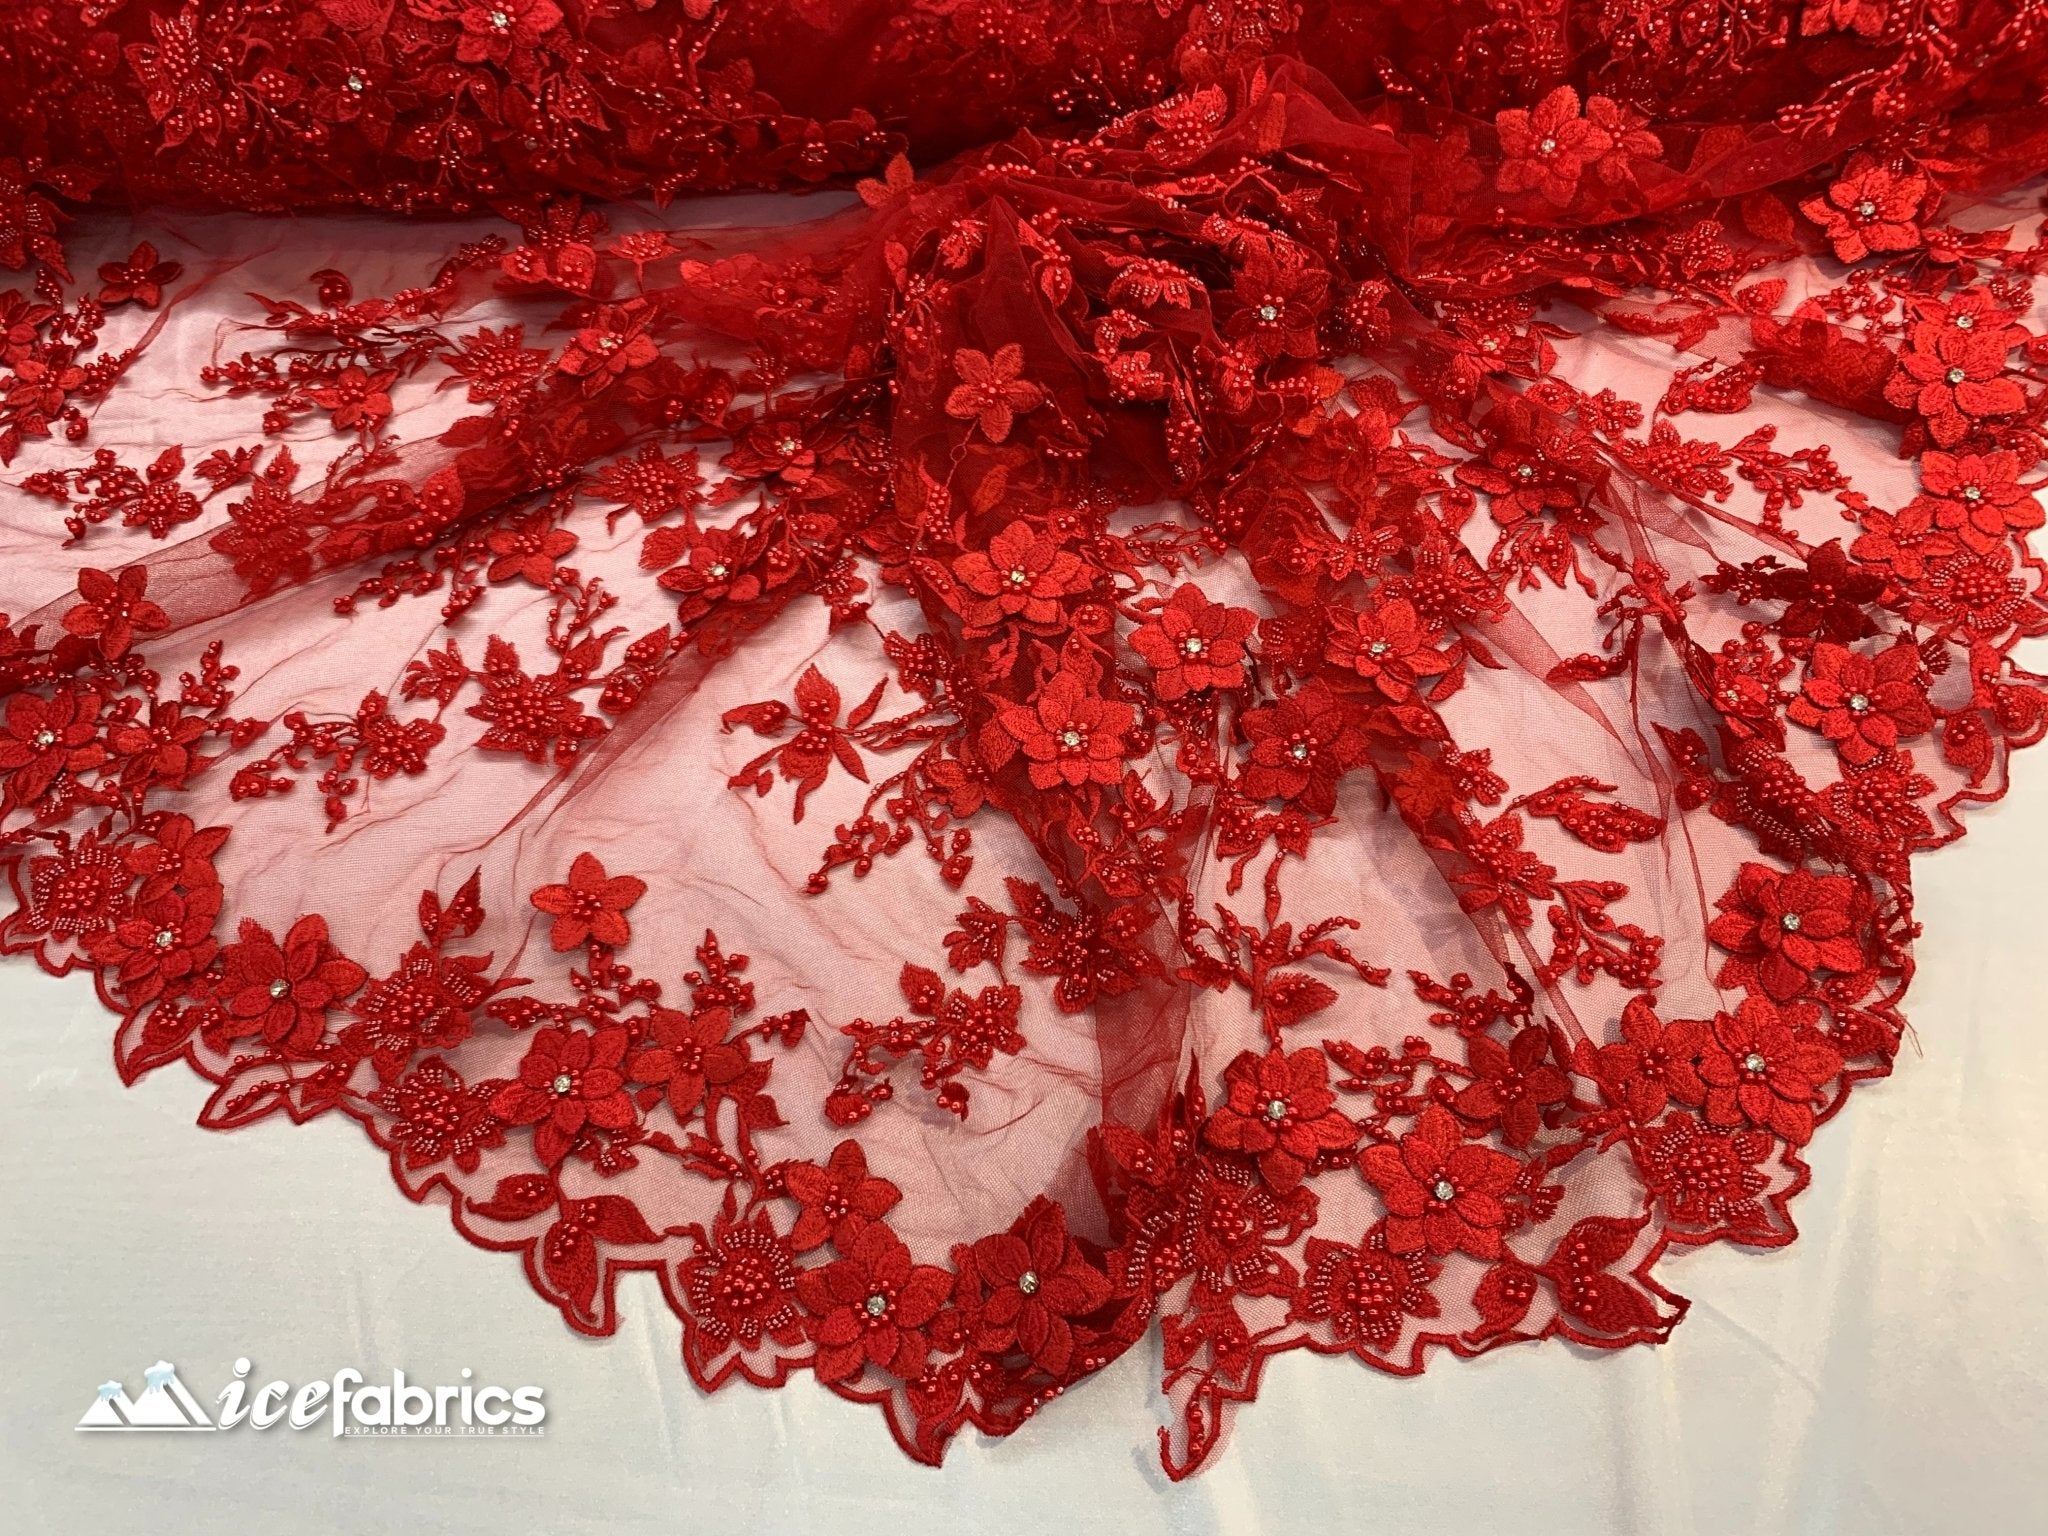 Flowers Embroidered Beaded Fabric/ Mesh Lace Fabric/ Bridal Fabric/ICE FABRICSICE FABRICSRedFlowers Embroidered Beaded Fabric/ Mesh Lace Fabric/ Bridal Fabric/ ICE FABRICS Red